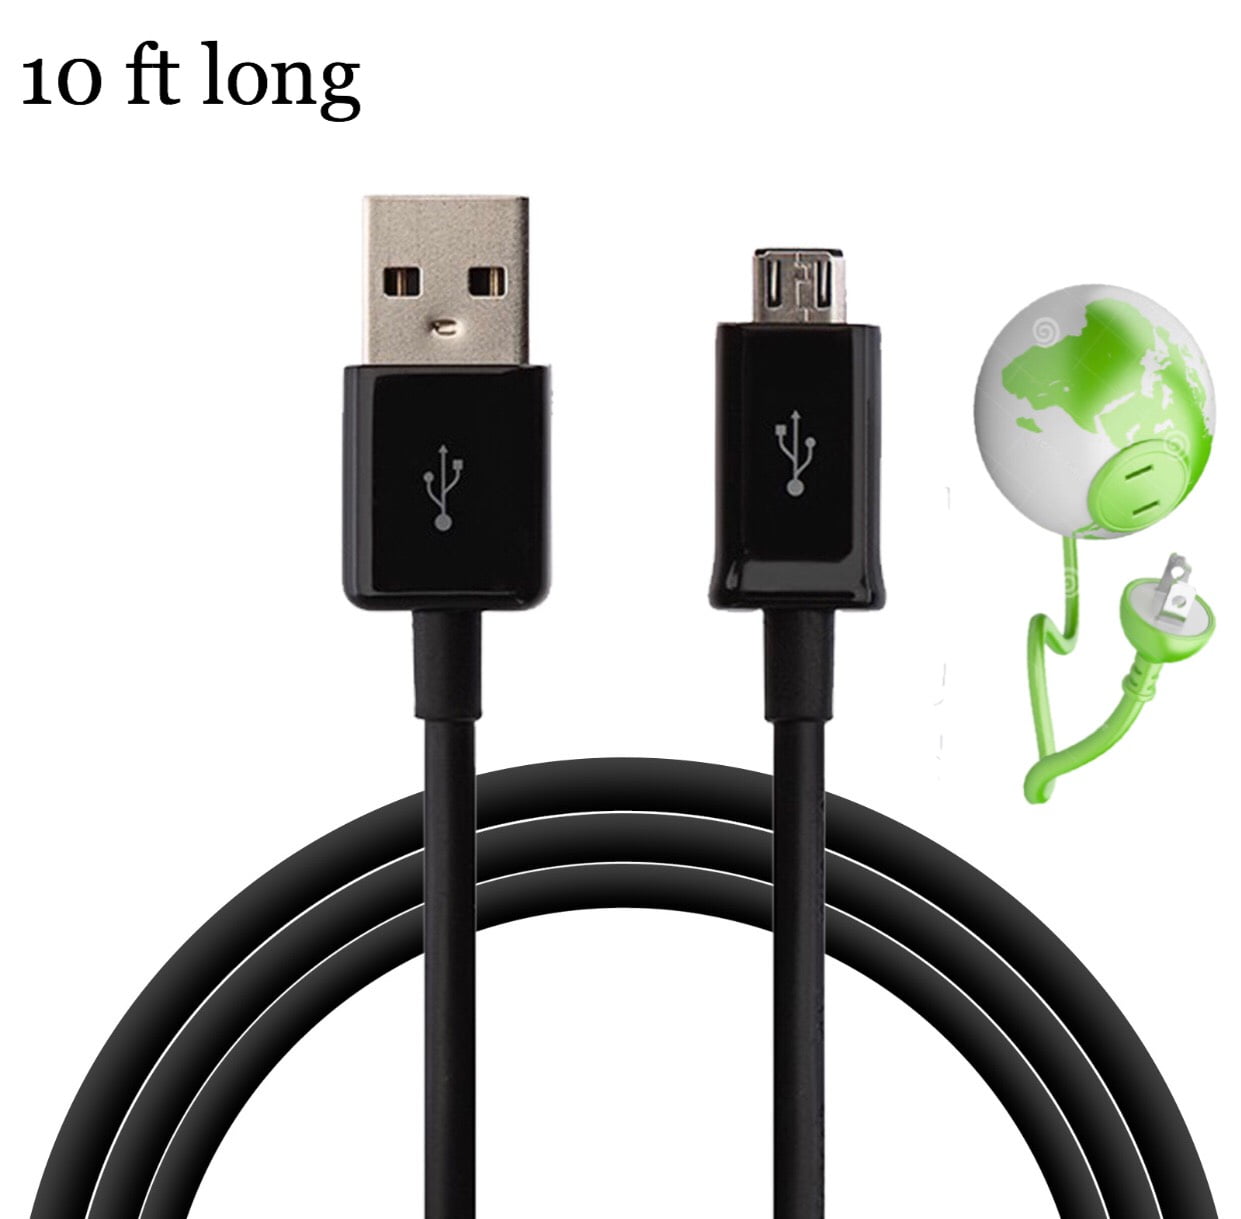 PWA C 10ft Long Replacement USB Cable for Power A Brand Switch Xbox One X S Wireless & Wired Controller - Walmart.com